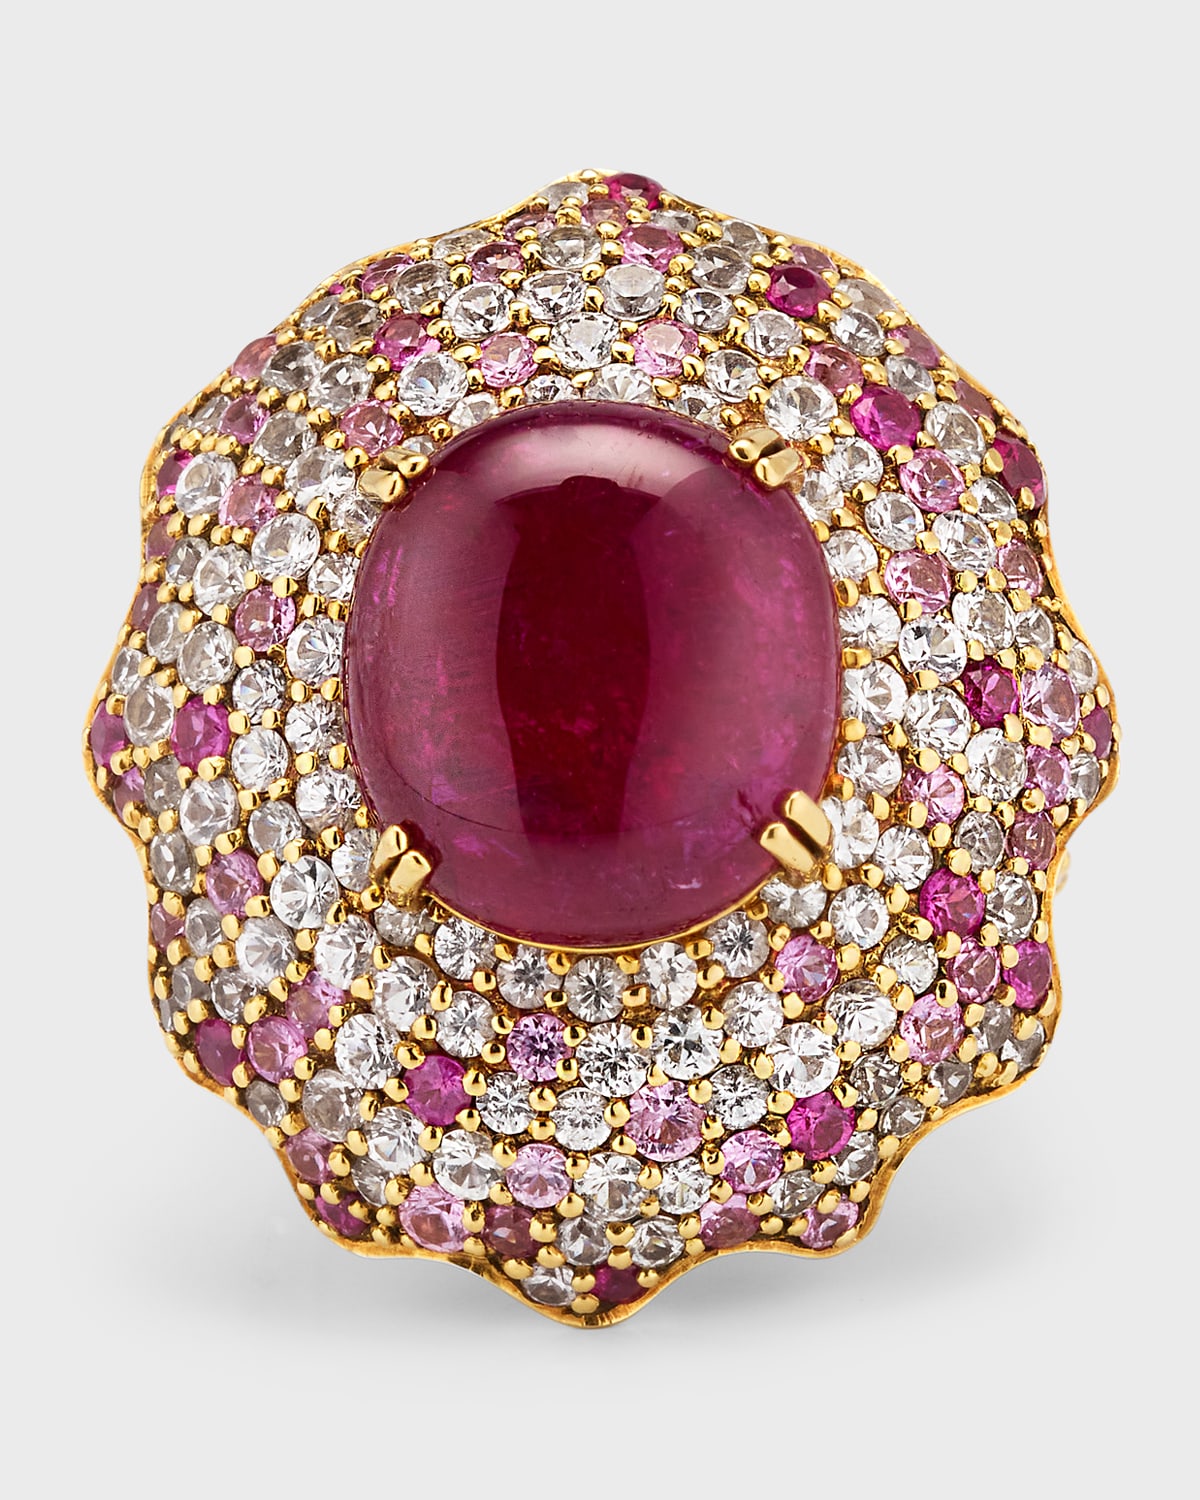 18K Yellow Gold Ruby Ring with Diamonds and Sapphires, Size 7.5